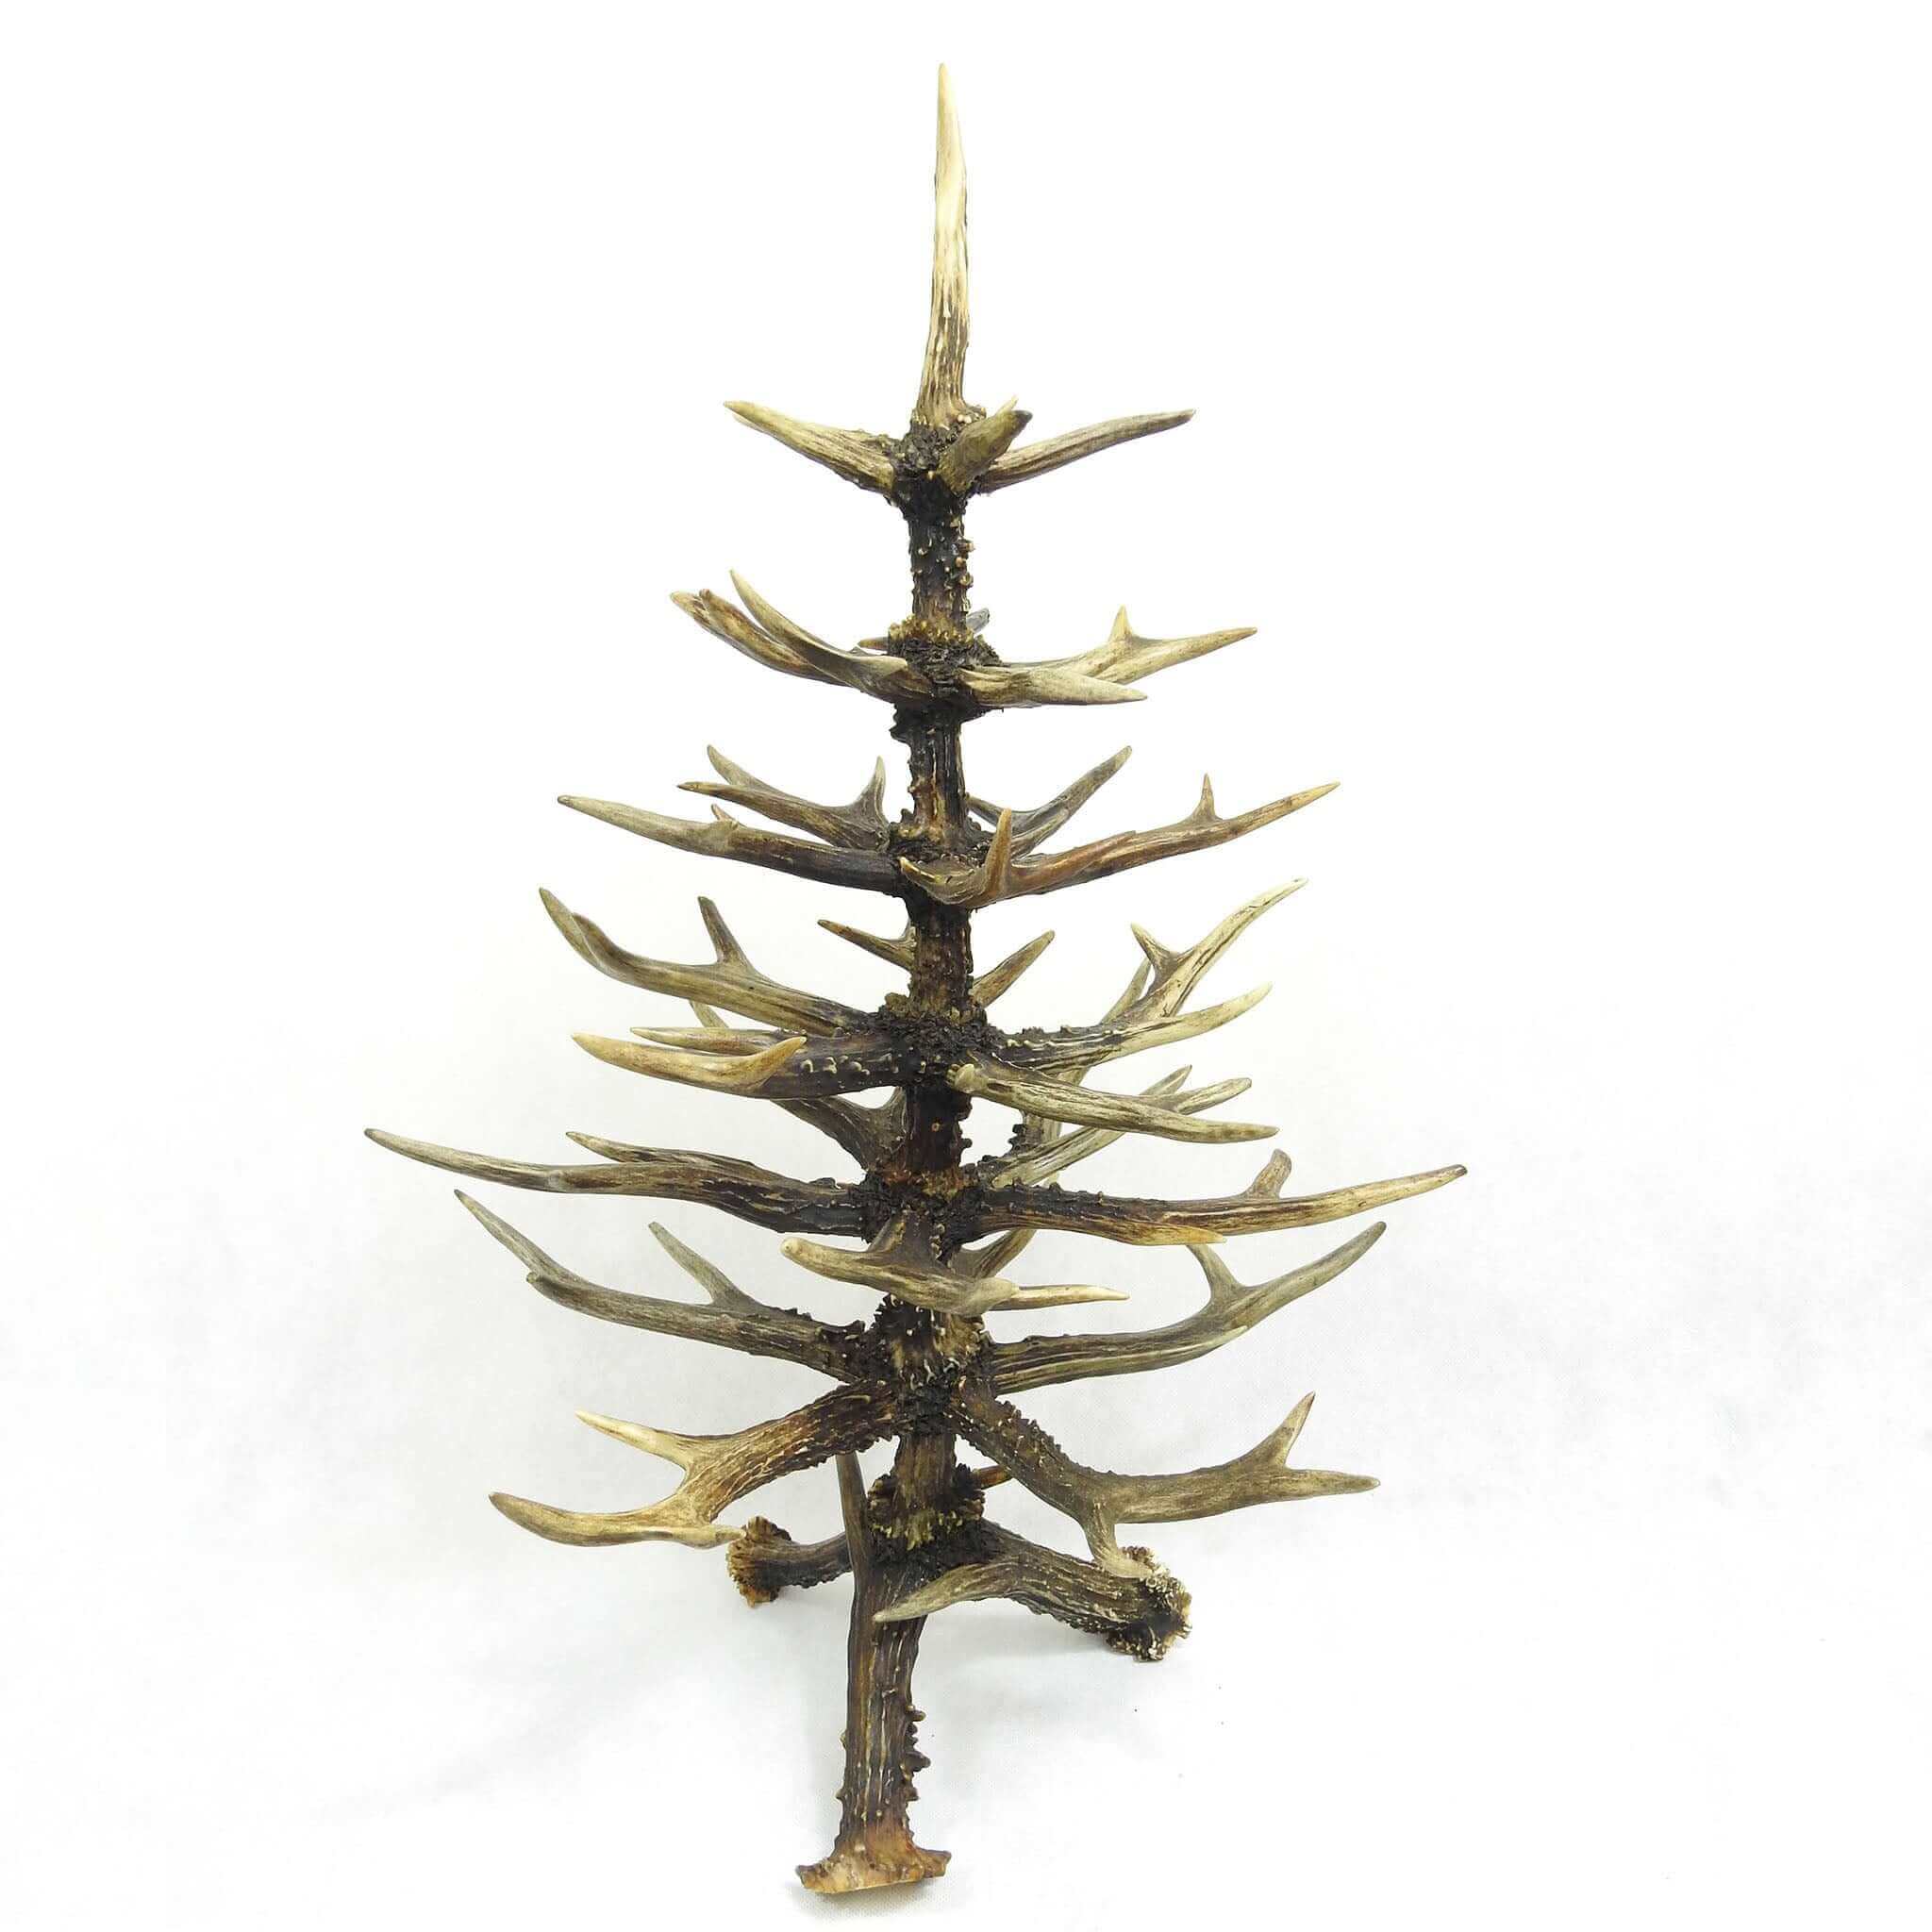 Experience the majestic beauty of nature with this beautifully crafted Roe Deer Antler Christmas Tree.